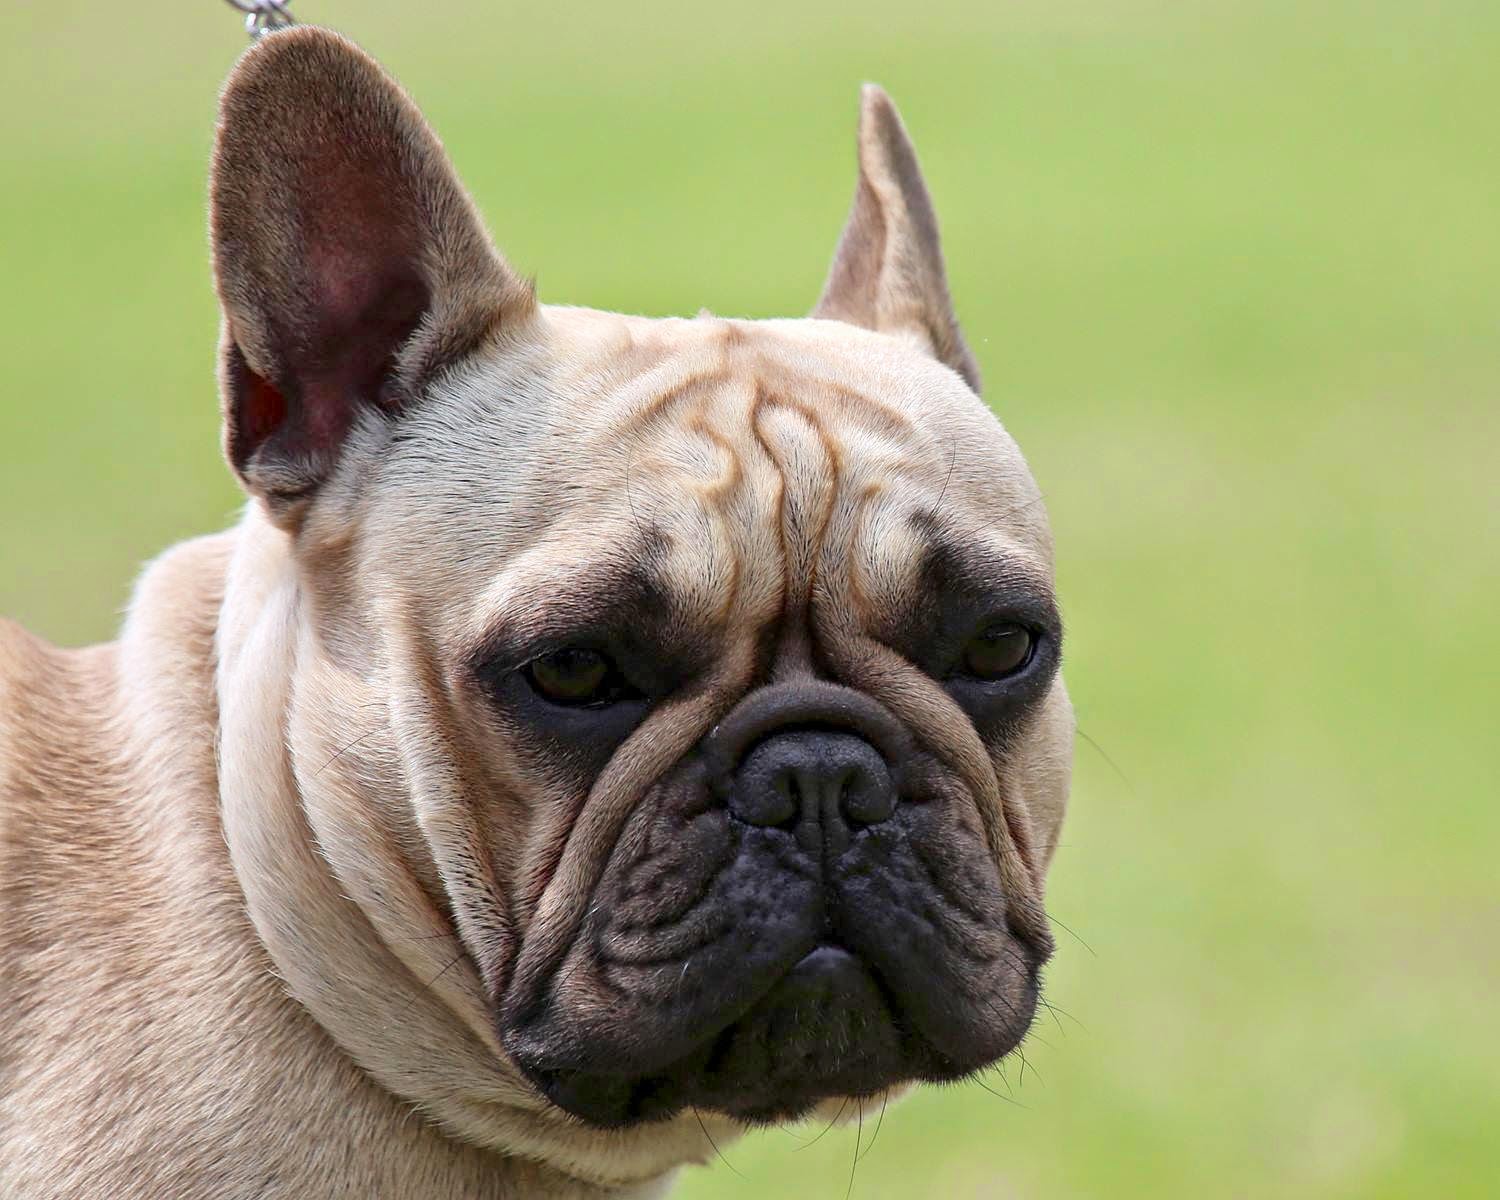 Pedigree Dogs Exposed - The Blog: French Bulldogs - from nose to... er...